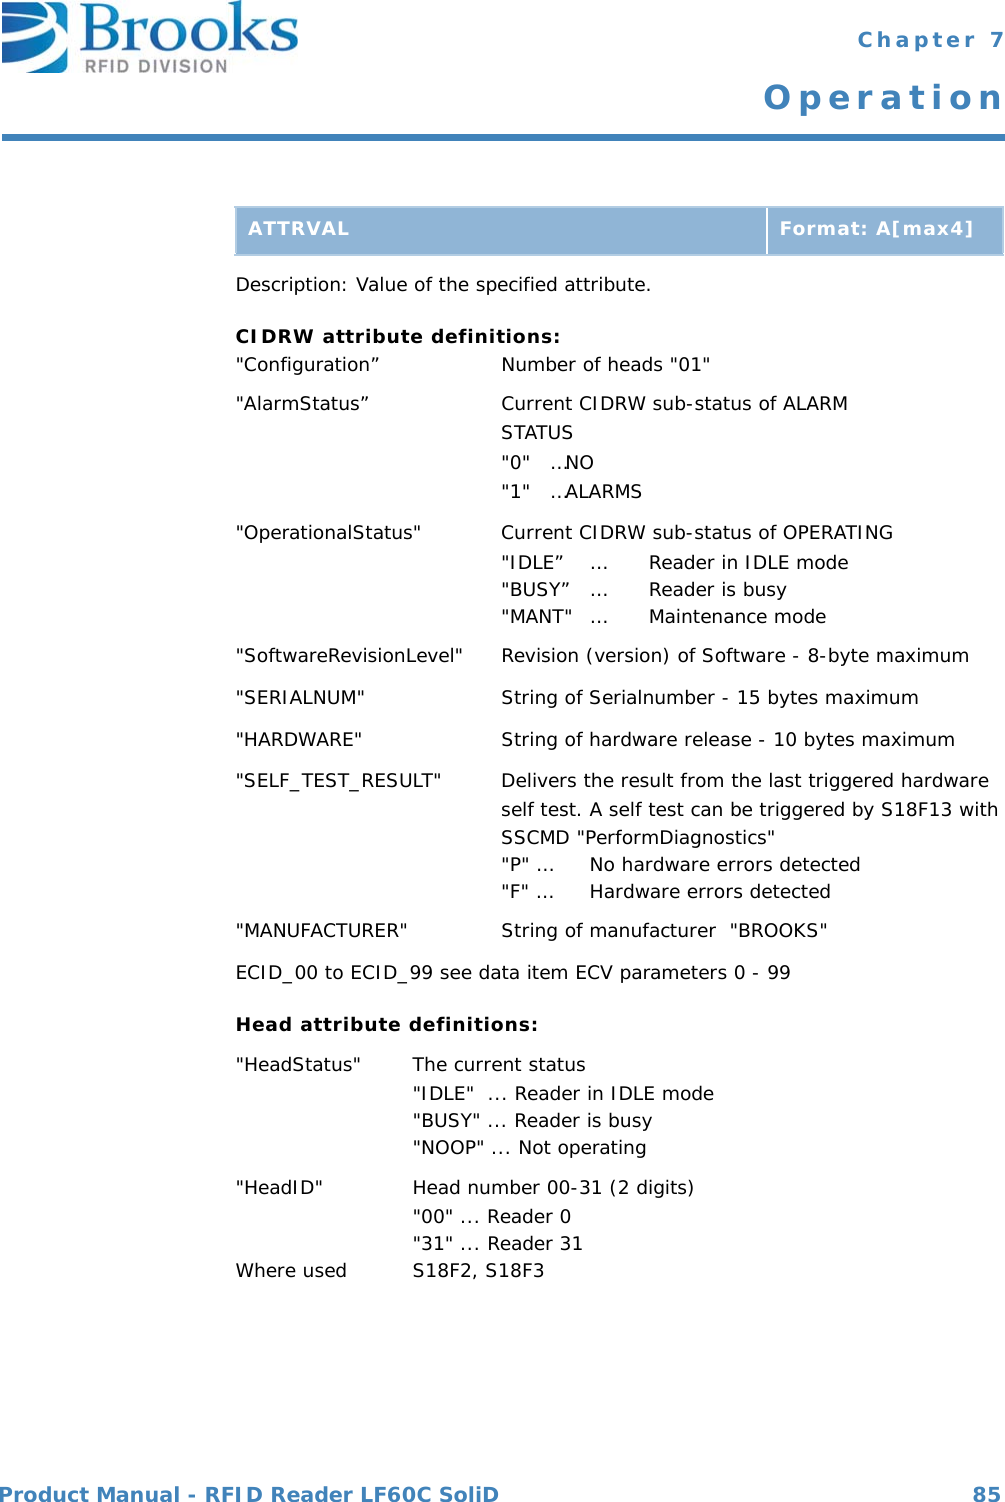 Product Manual - RFID Reader LF60C SoliD 85 Chapter 7OperationDescription: Value of the specified attribute.CIDRW attribute definitions:&quot;Configuration” Number of heads &quot;01&quot;&quot;AlarmStatus” Current CIDRW sub-status of ALARM STATUS&quot;0&quot;   …NO&quot;1&quot;   …ALARMS&quot;OperationalStatus&quot; Current CIDRW sub-status of OPERATING&quot;IDLE” … Reader in IDLE mode&quot;BUSY” … Reader is busy&quot;MANT&quot; … Maintenance mode&quot;SoftwareRevisionLevel&quot; Revision (version) of Software - 8-byte maximum&quot;SERIALNUM&quot; String of Serialnumber - 15 bytes maximum&quot;HARDWARE&quot; String of hardware release - 10 bytes maximum&quot;SELF_TEST_RESULT&quot; Delivers the result from the last triggered hardwareself test. A self test can be triggered by S18F13 withSSCMD &quot;PerformDiagnostics&quot;&quot;P&quot; …  No hardware errors detected&quot;F&quot; …  Hardware errors detected&quot;MANUFACTURER&quot; String of manufacturer  &quot;BROOKS&quot;ECID_00 to ECID_99 see data item ECV parameters 0 - 99Head attribute definitions:&quot;HeadStatus&quot;  The current status&quot;IDLE&quot;  ... Reader in IDLE mode&quot;BUSY&quot; ... Reader is busy&quot;NOOP&quot; ... Not operating&quot;HeadID&quot;  Head number 00-31 (2 digits)&quot;00&quot; ... Reader 0&quot;31&quot; ... Reader 31Where used  S18F2, S18F3ATTRVAL Format: A[max4]